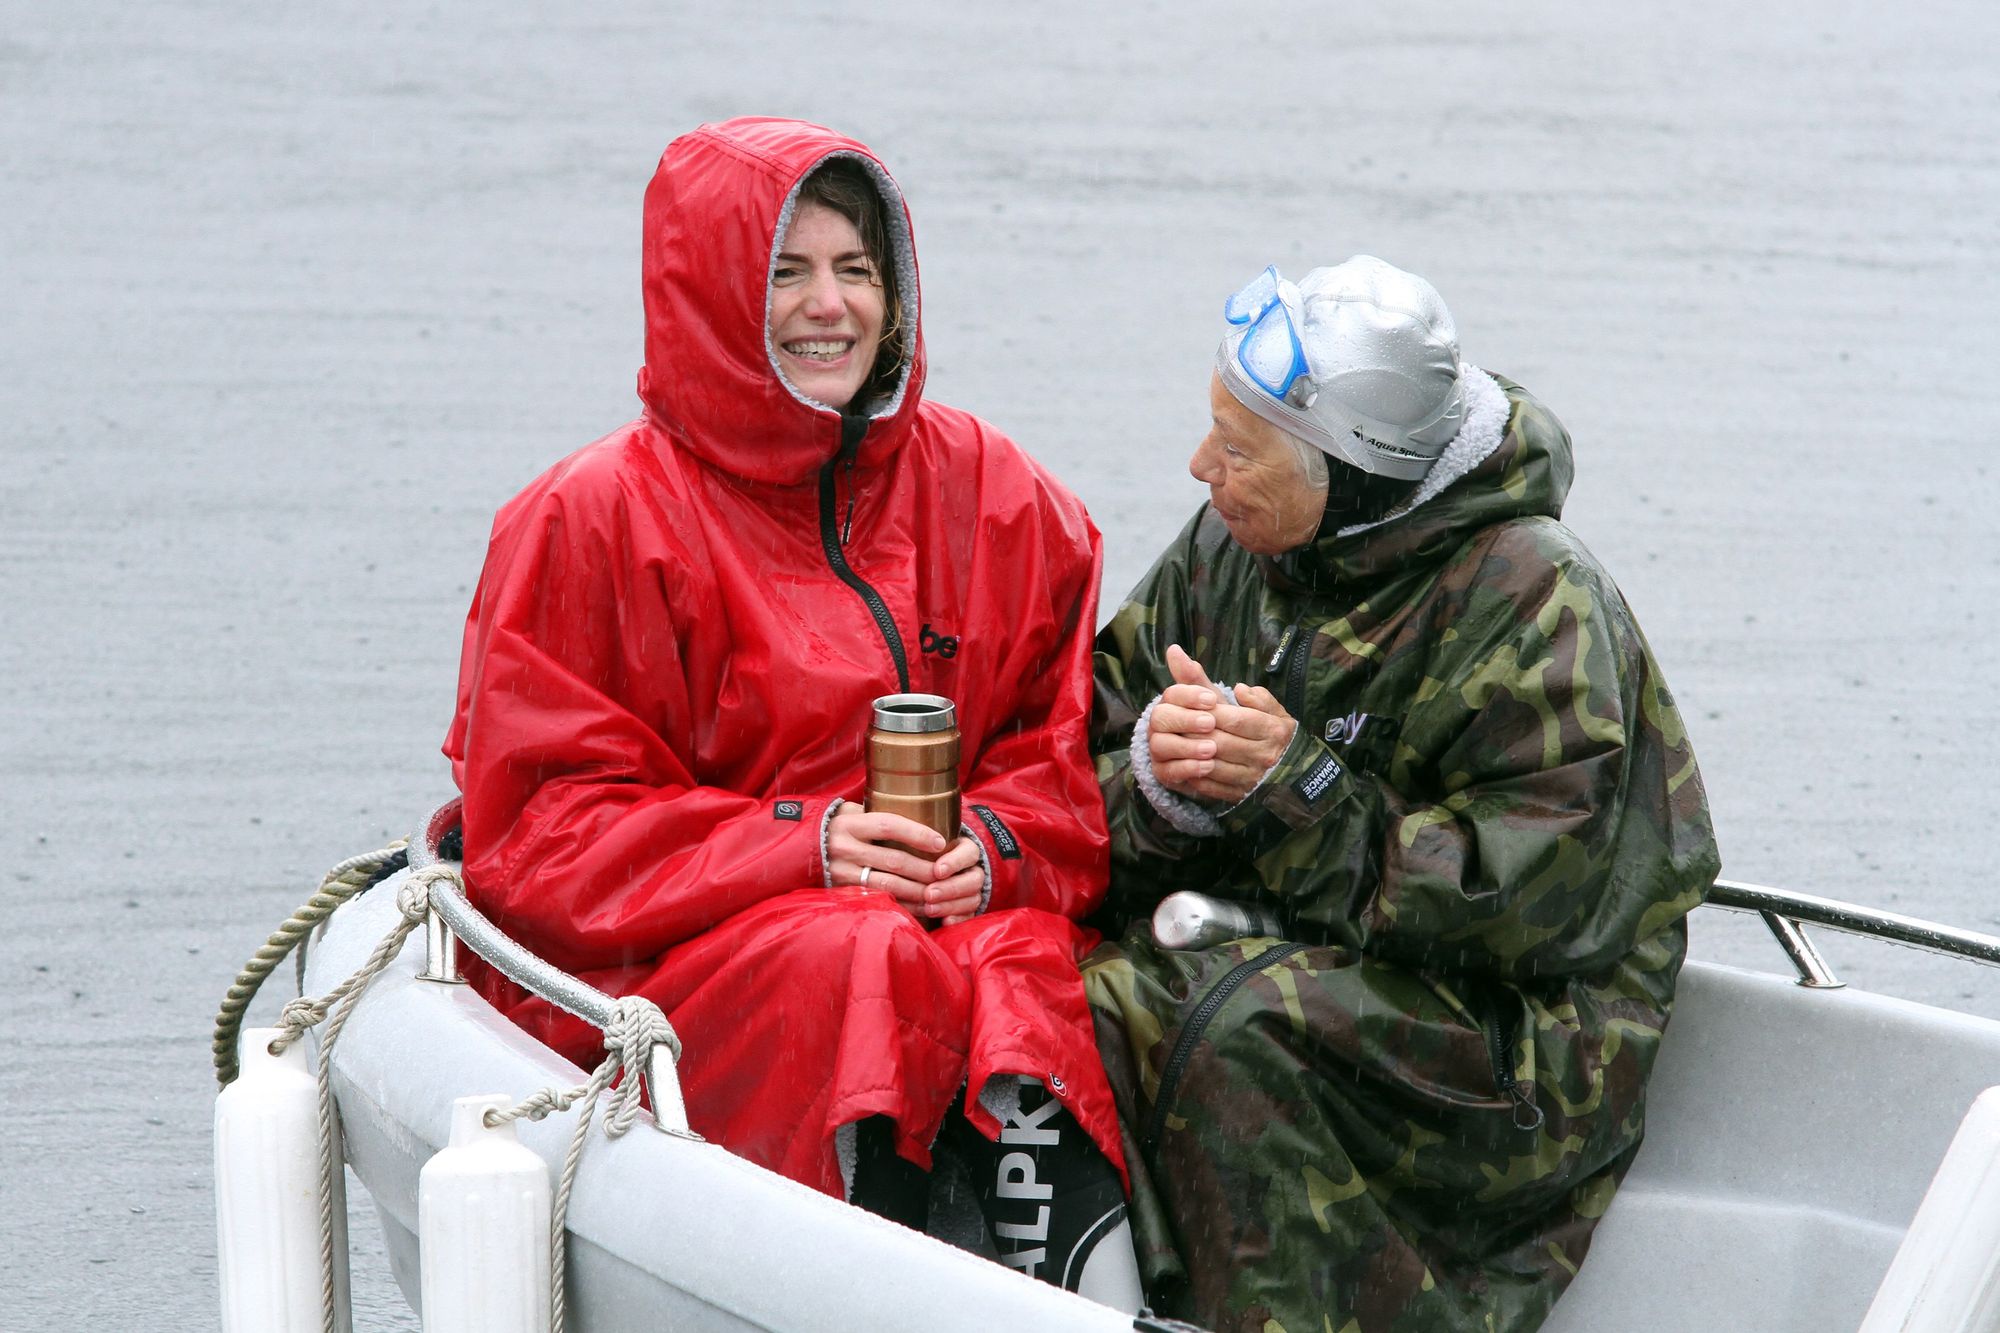 Two women warm up after an outdoor swim in the rain.